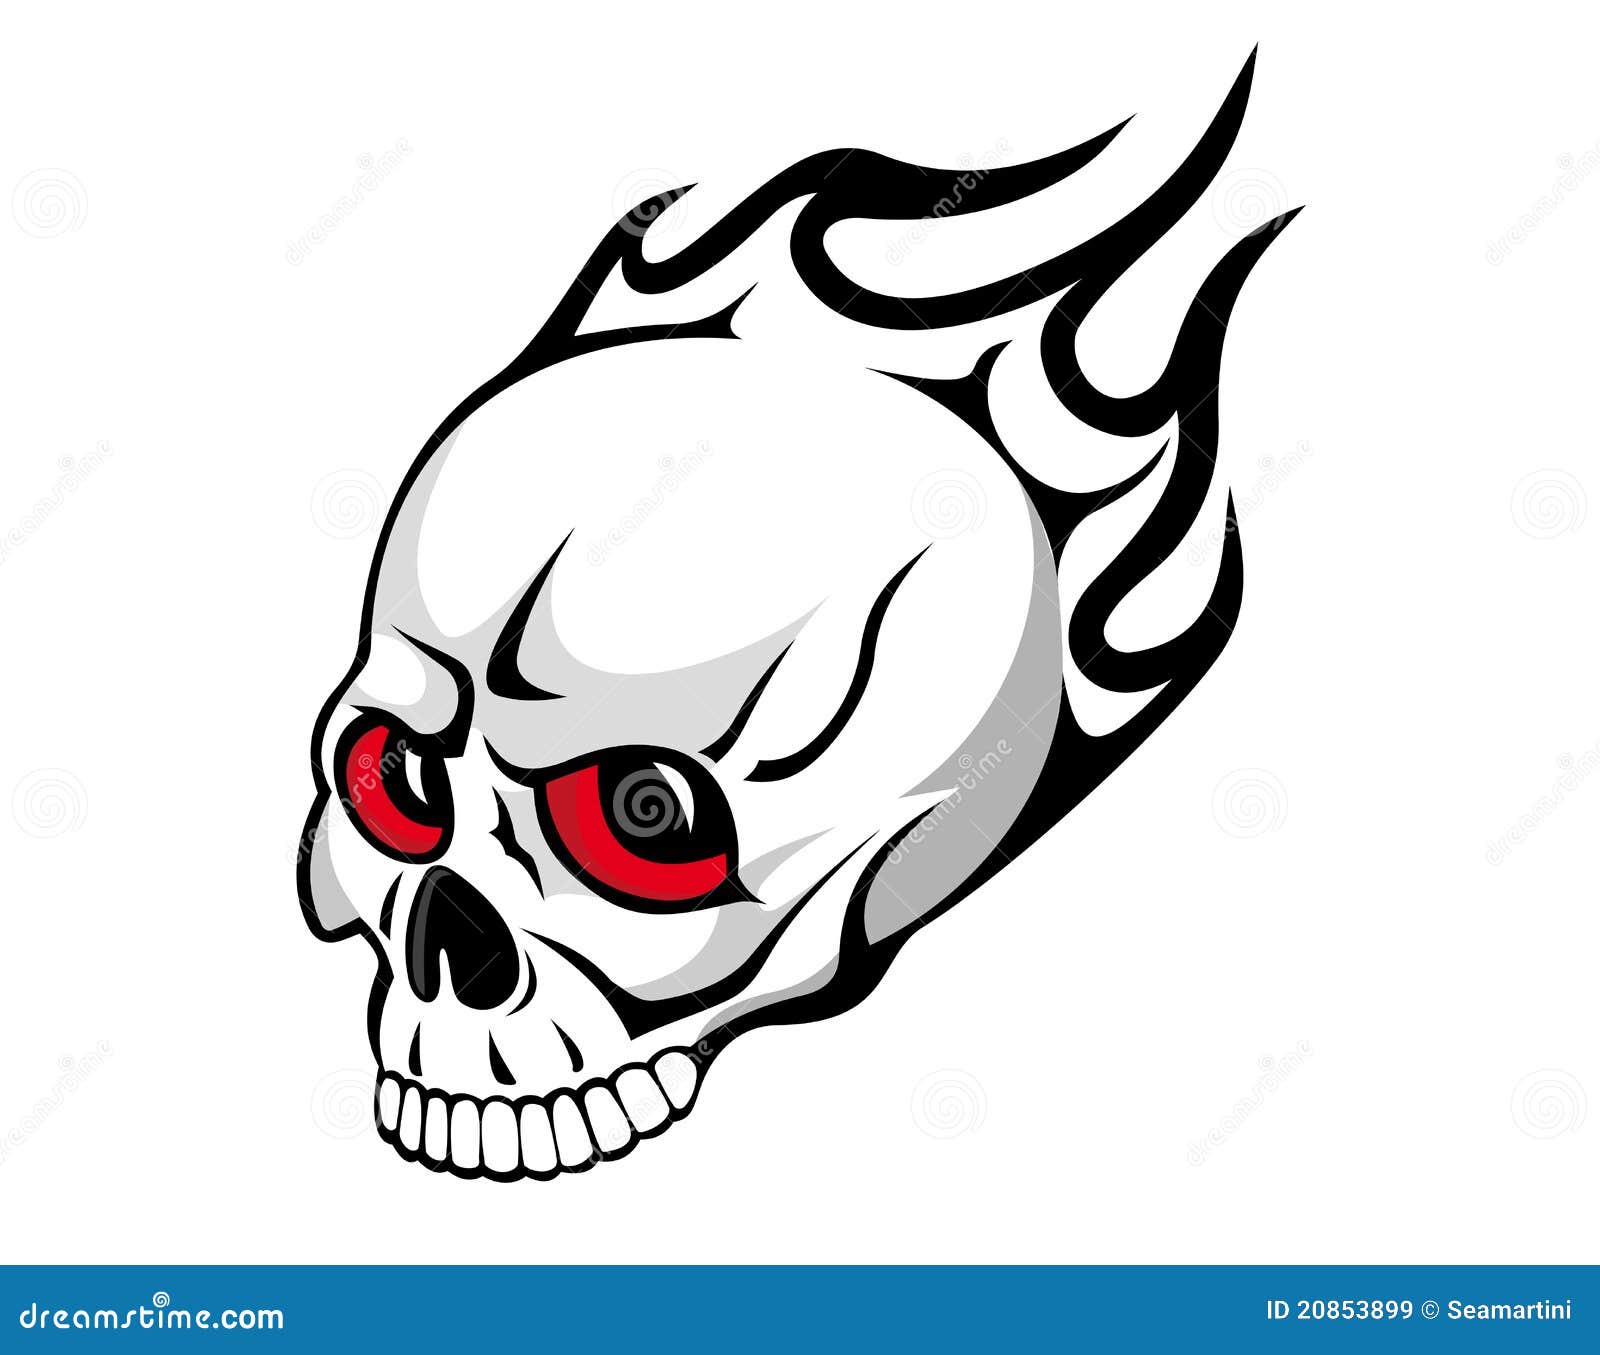 Evil Skull Tattoo Designs Gifts  Merchandise for Sale  Redbubble